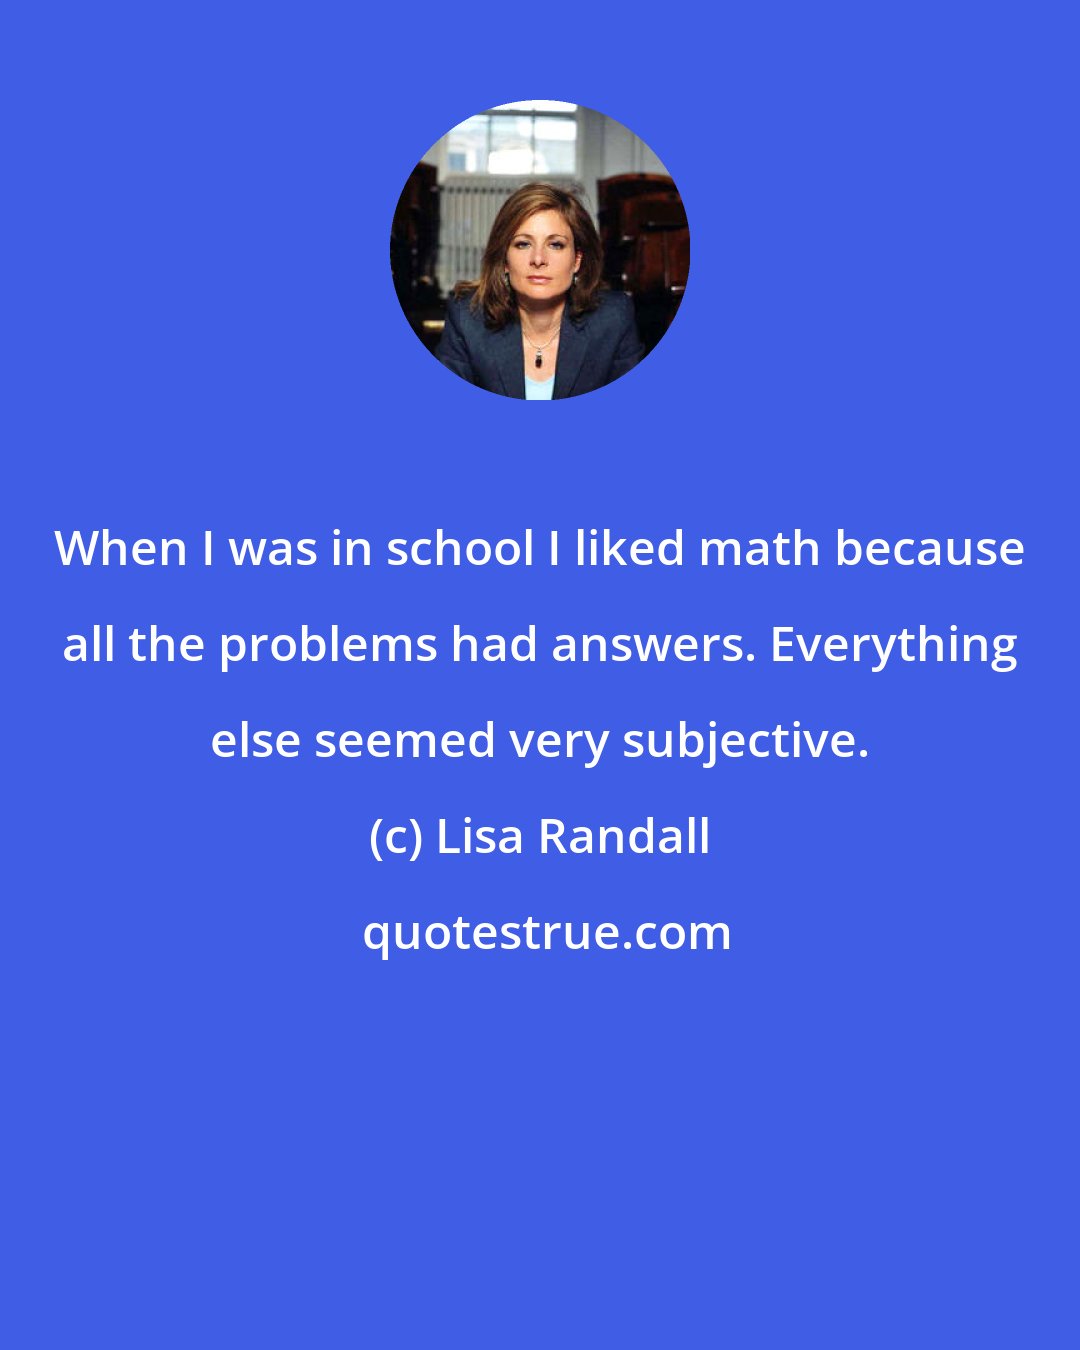 Lisa Randall: When I was in school I liked math because all the problems had answers. Everything else seemed very subjective.